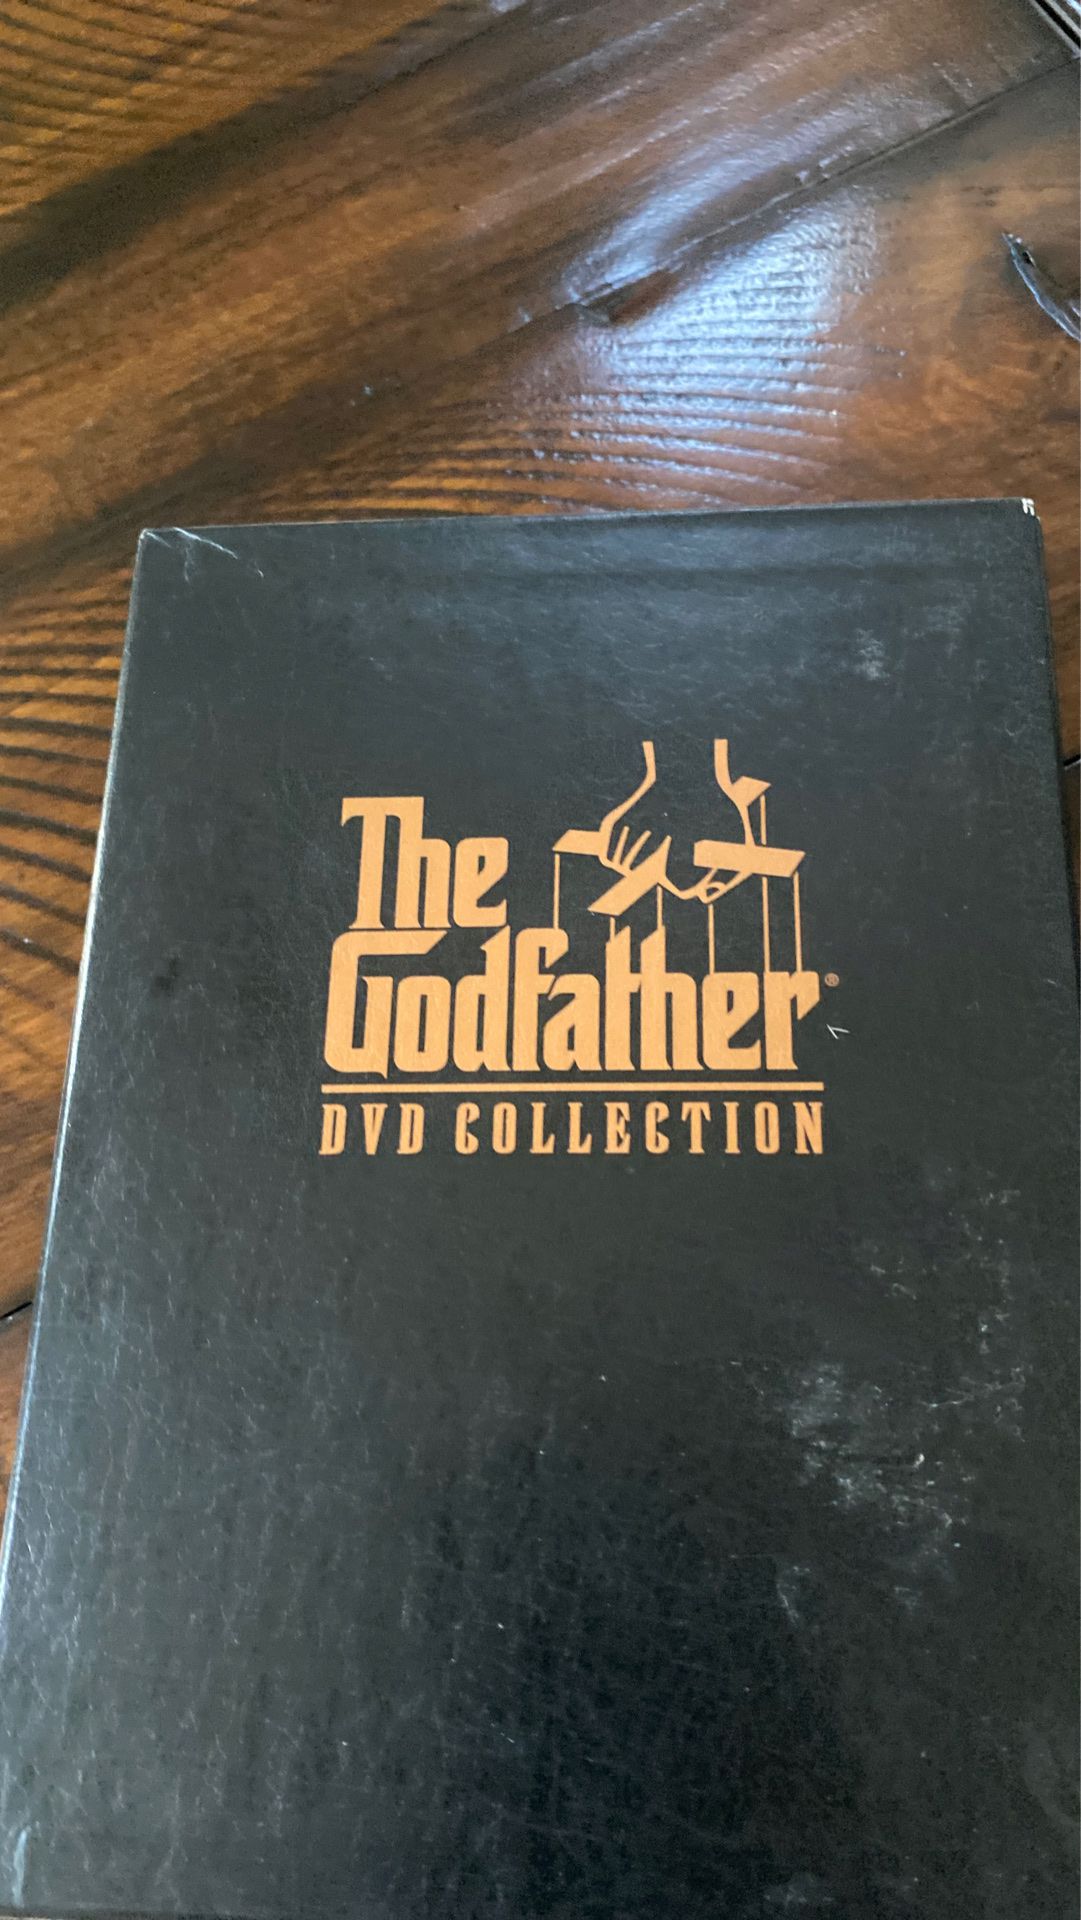 Godfather DVD collection